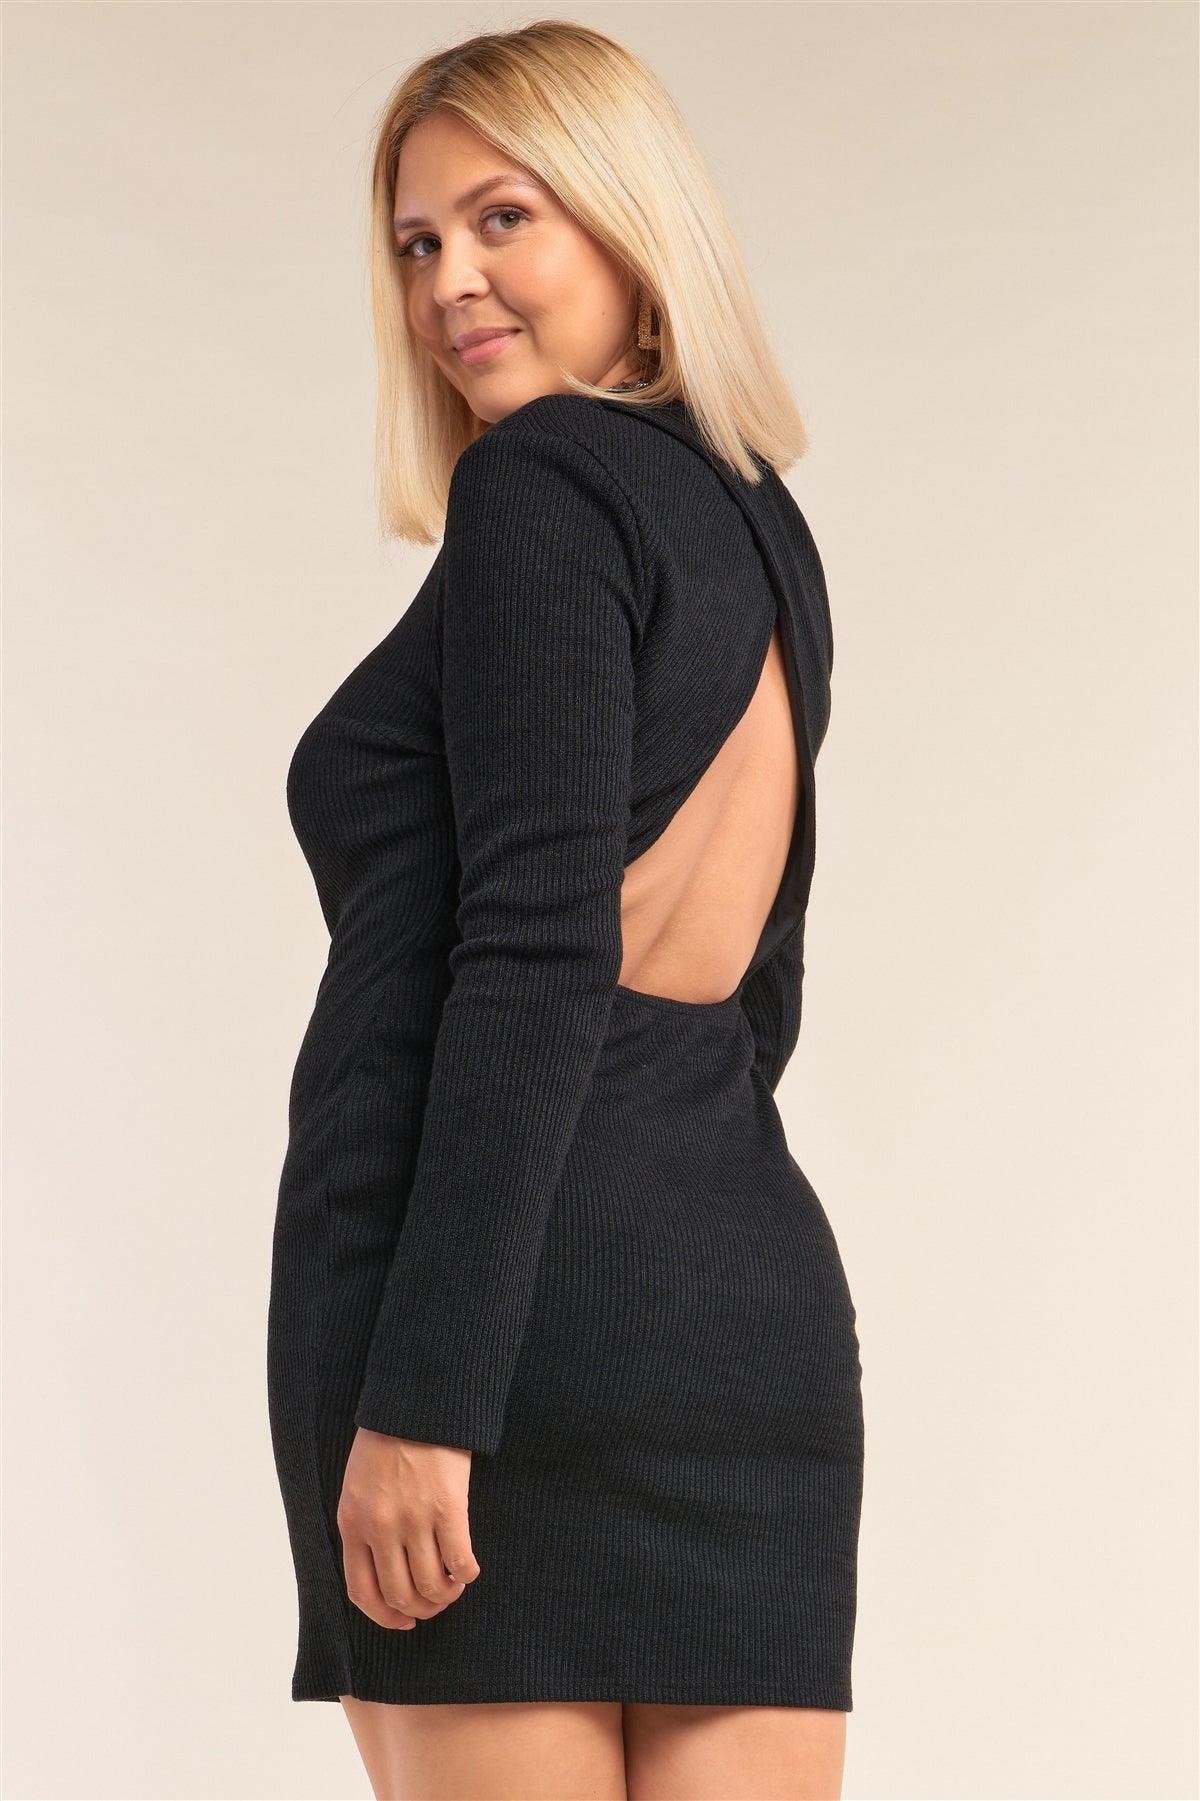 Junior Plus Size Black Long Sleeve Ribbed Knit Sexy Cut Out Back Mini Dress /3-2-2